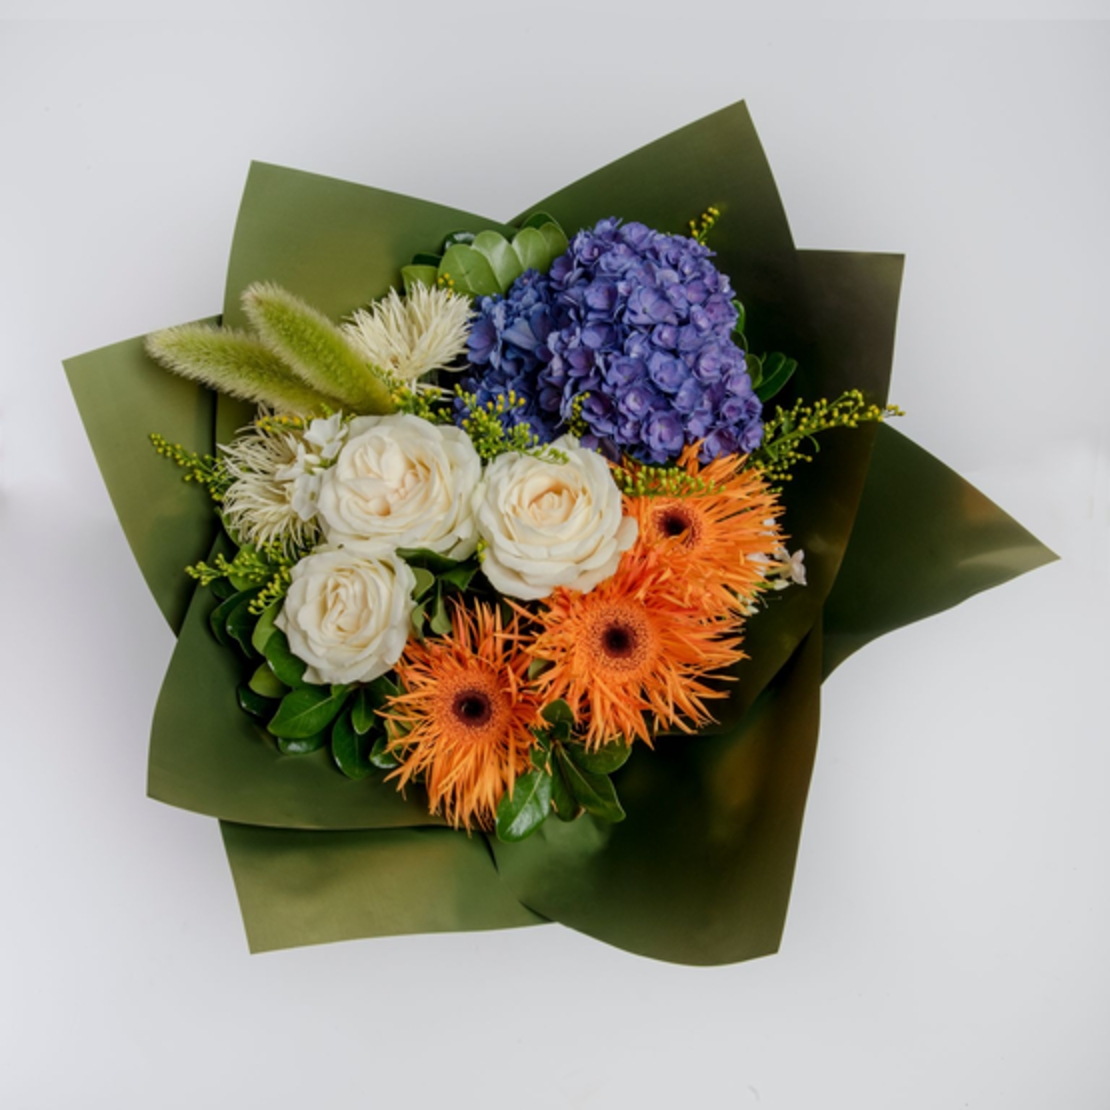 A bouquet of flowers in a European style